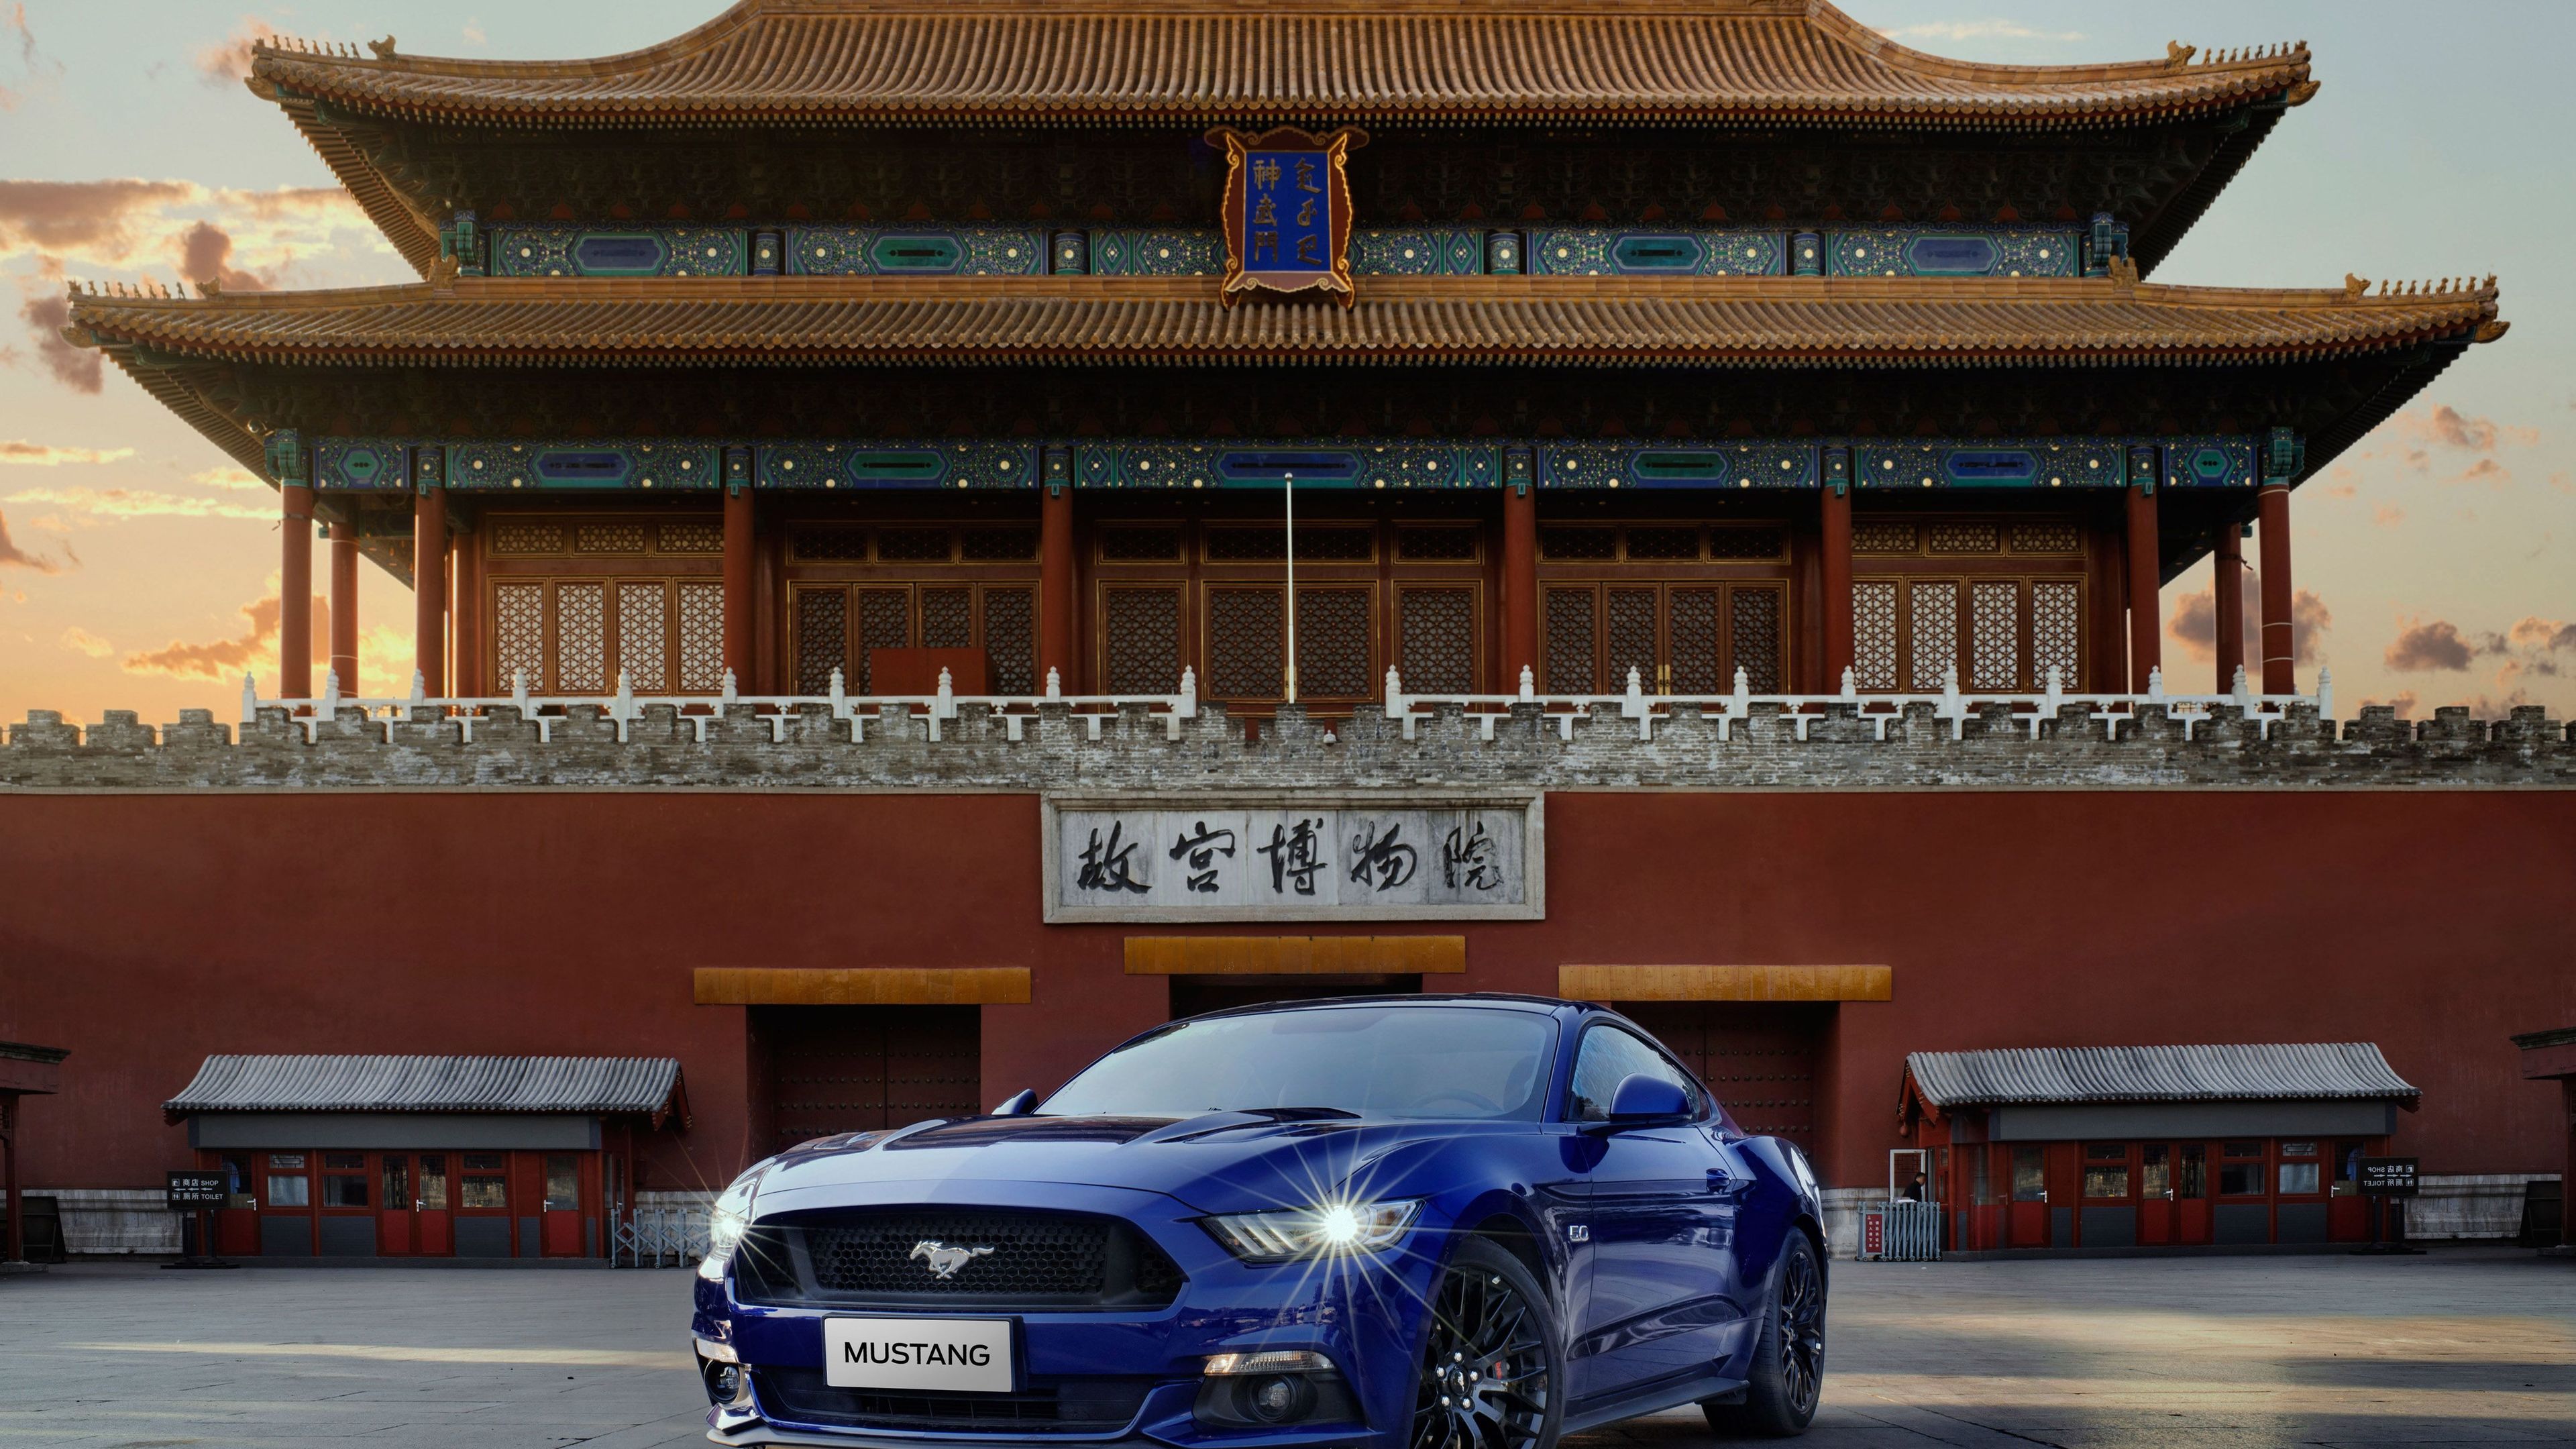 ford mustang in china 1539110798 - Ford Mustang In China - mustang wallpapers, hd-wallpapers, ford wallpapers, ford mustang wallpapers, cars wallpapers, 4k-wallpapers, 2018 cars wallpapers